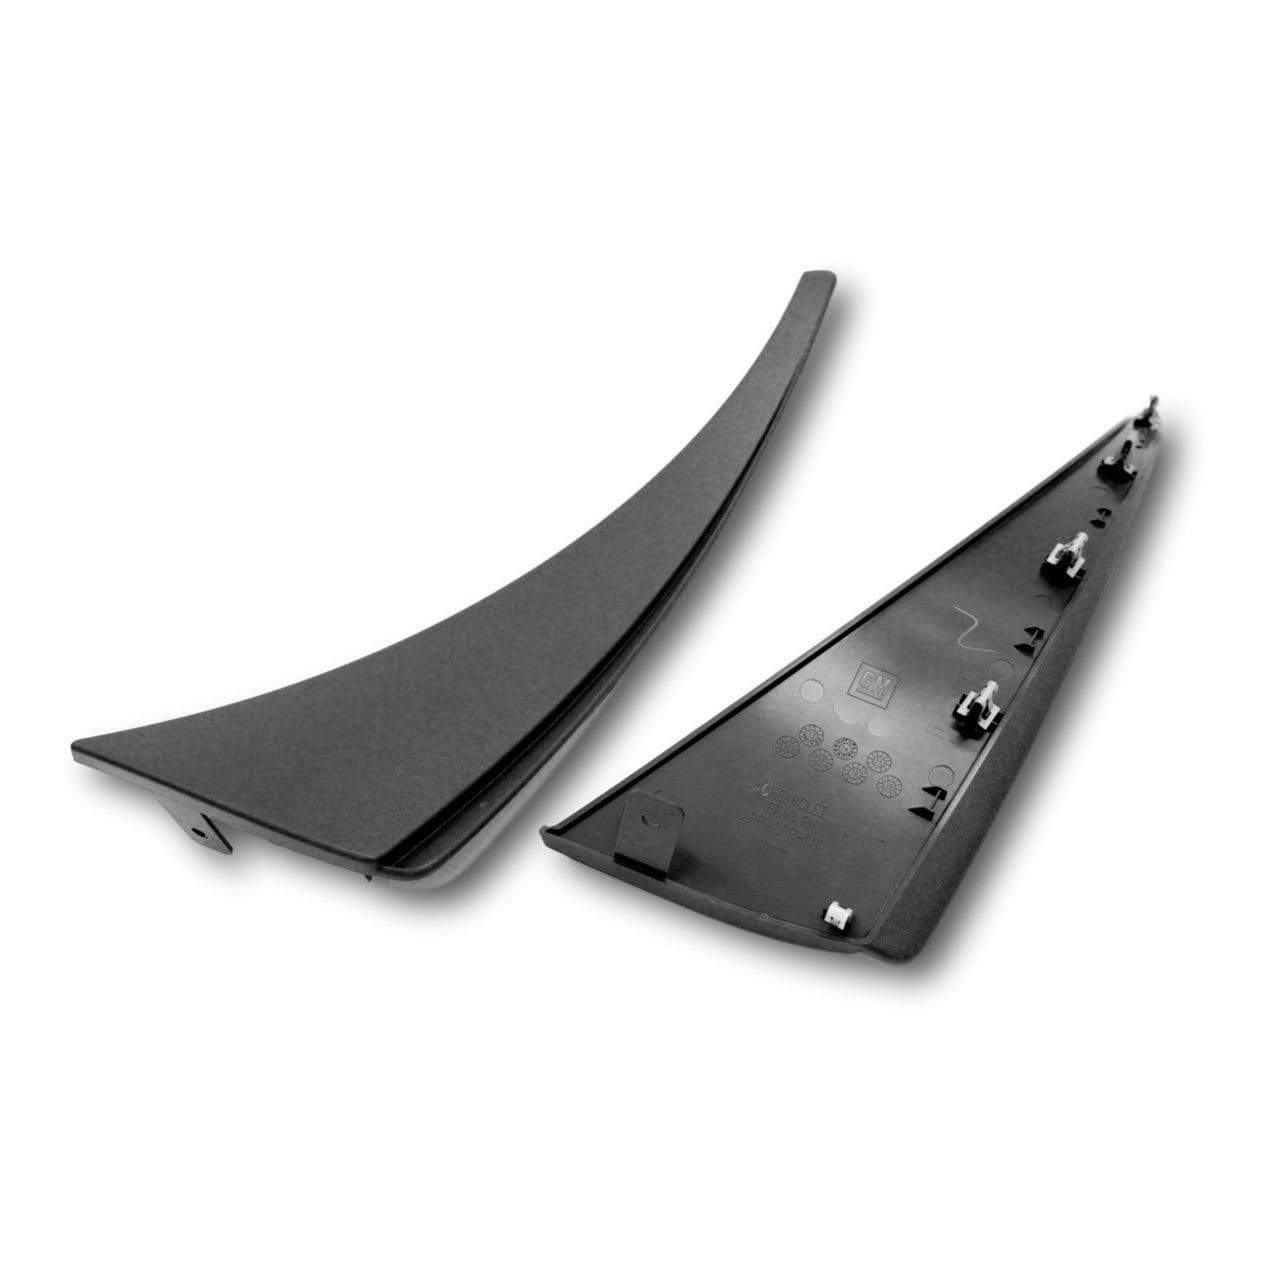 ACS Composite Enhanced Front Splash Guards for C7 Corvette, Textured Black, SKU 45-4-063, with option to add GM Rear Wheel Mudflaps.